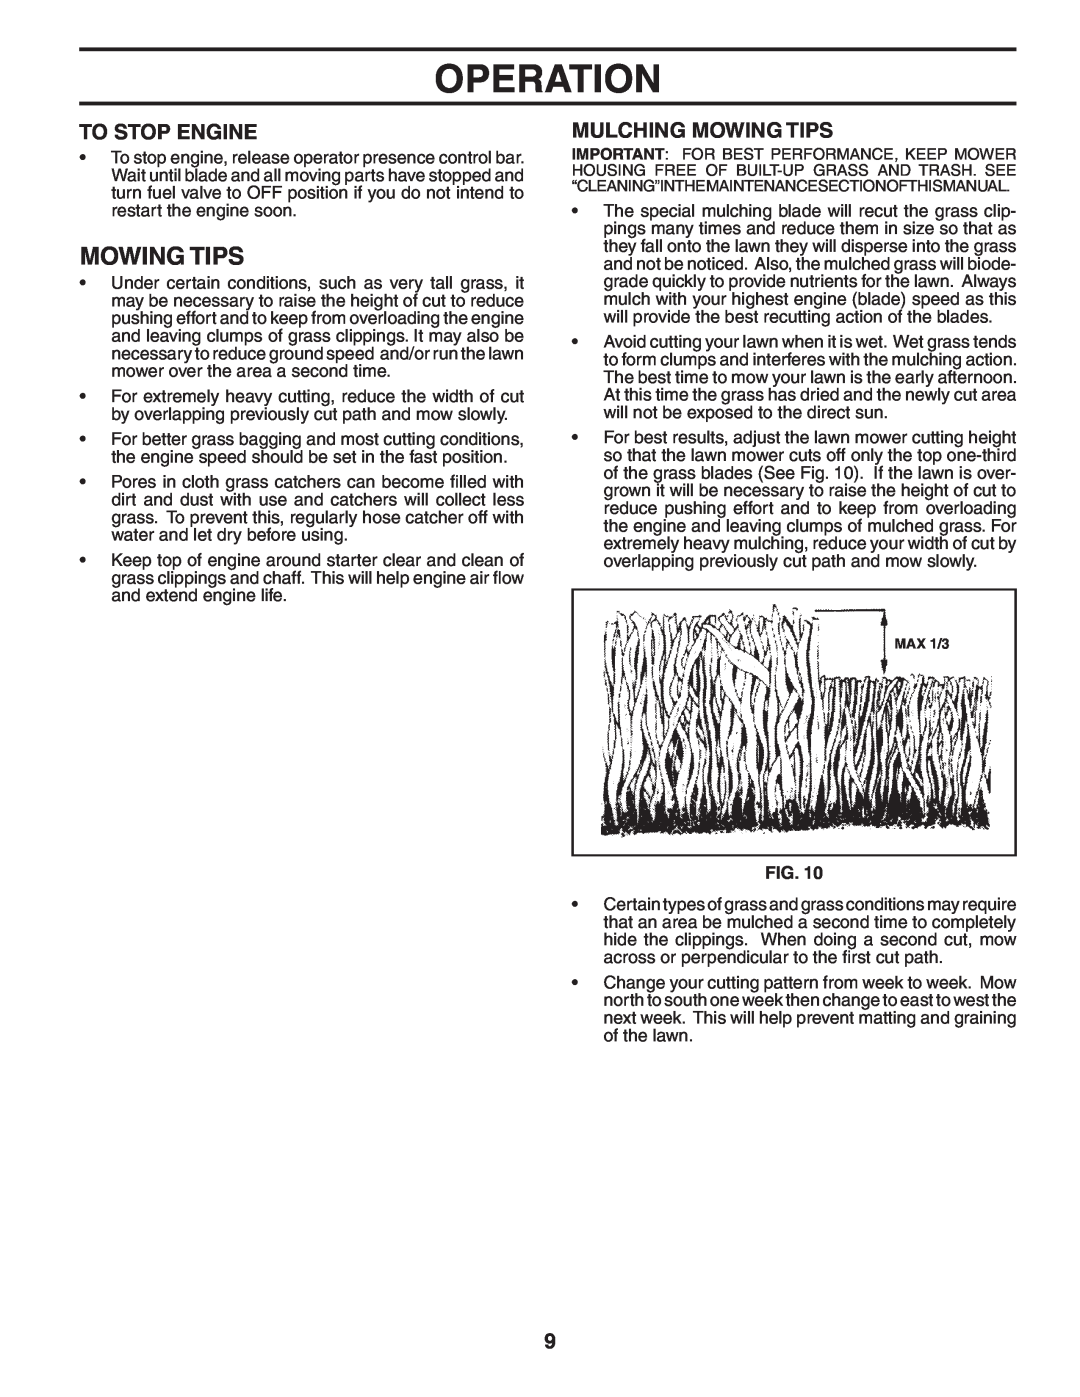 Husqvarna 5521CH owner manual To Stop Engine, Mulching Mowing Tips, Operation 